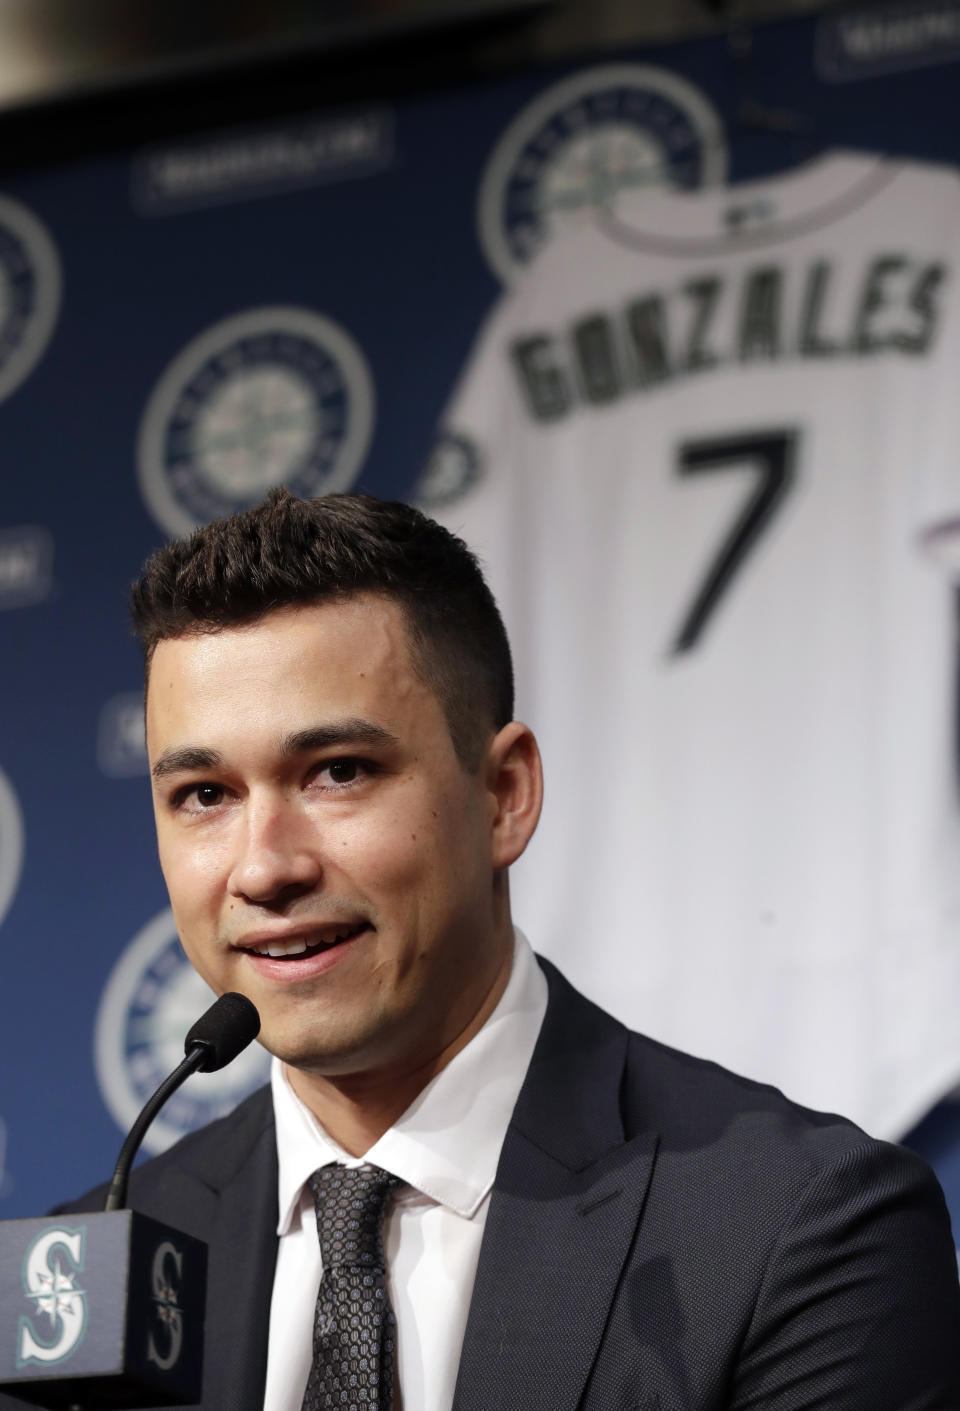 Seattle Mariners pitcher Marco Gonzales addresses a news conference Tuesday, Feb. 4, 2020, in Seattle. Gonzales and the Mariners agreed to a $30 million contract covering 2021-24, a deal that includes a club option and could be worth $45 million over five seasons. Gonzales is coming off the best season of his career. (AP Photo/Elaine Thompson)